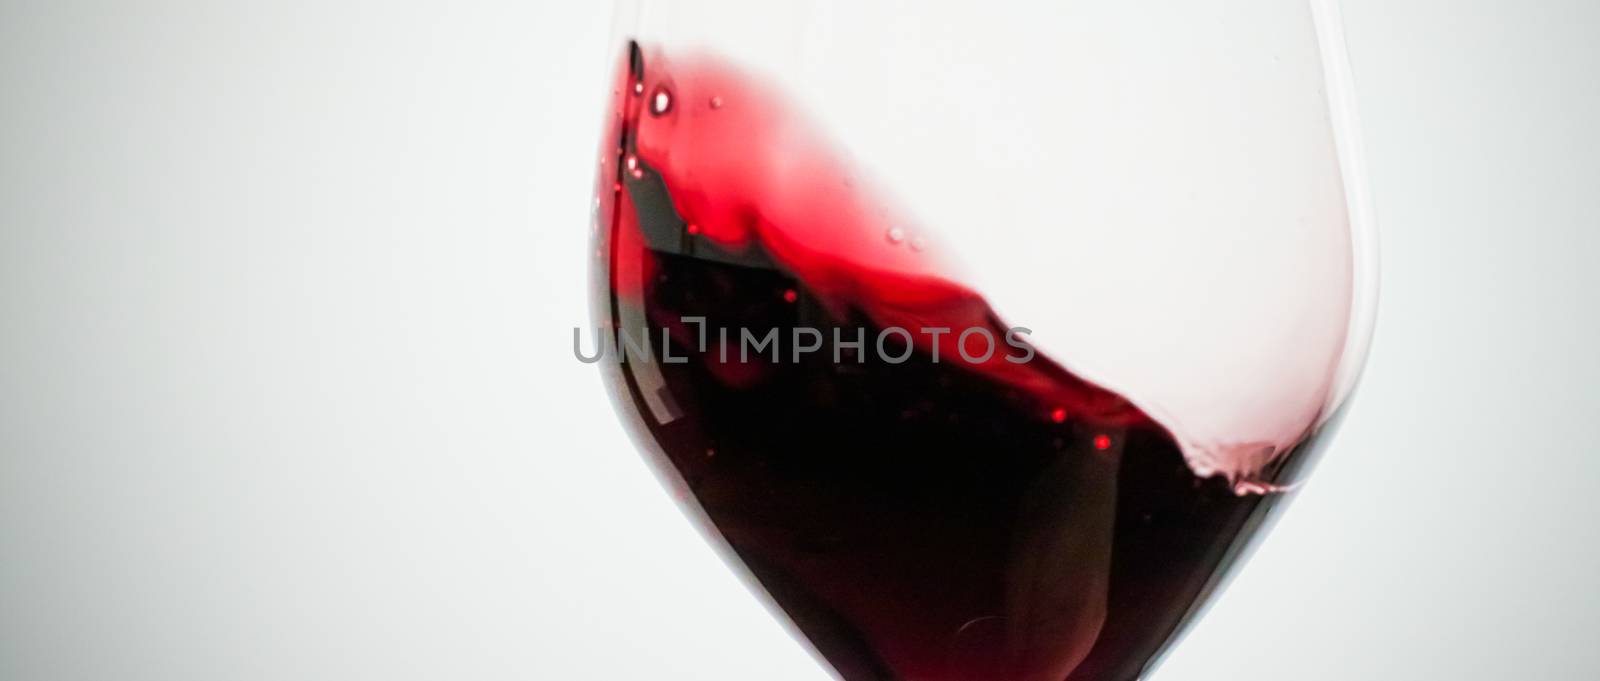 Glass of red wine, pouring drink at luxury holiday tasting event by Anneleven